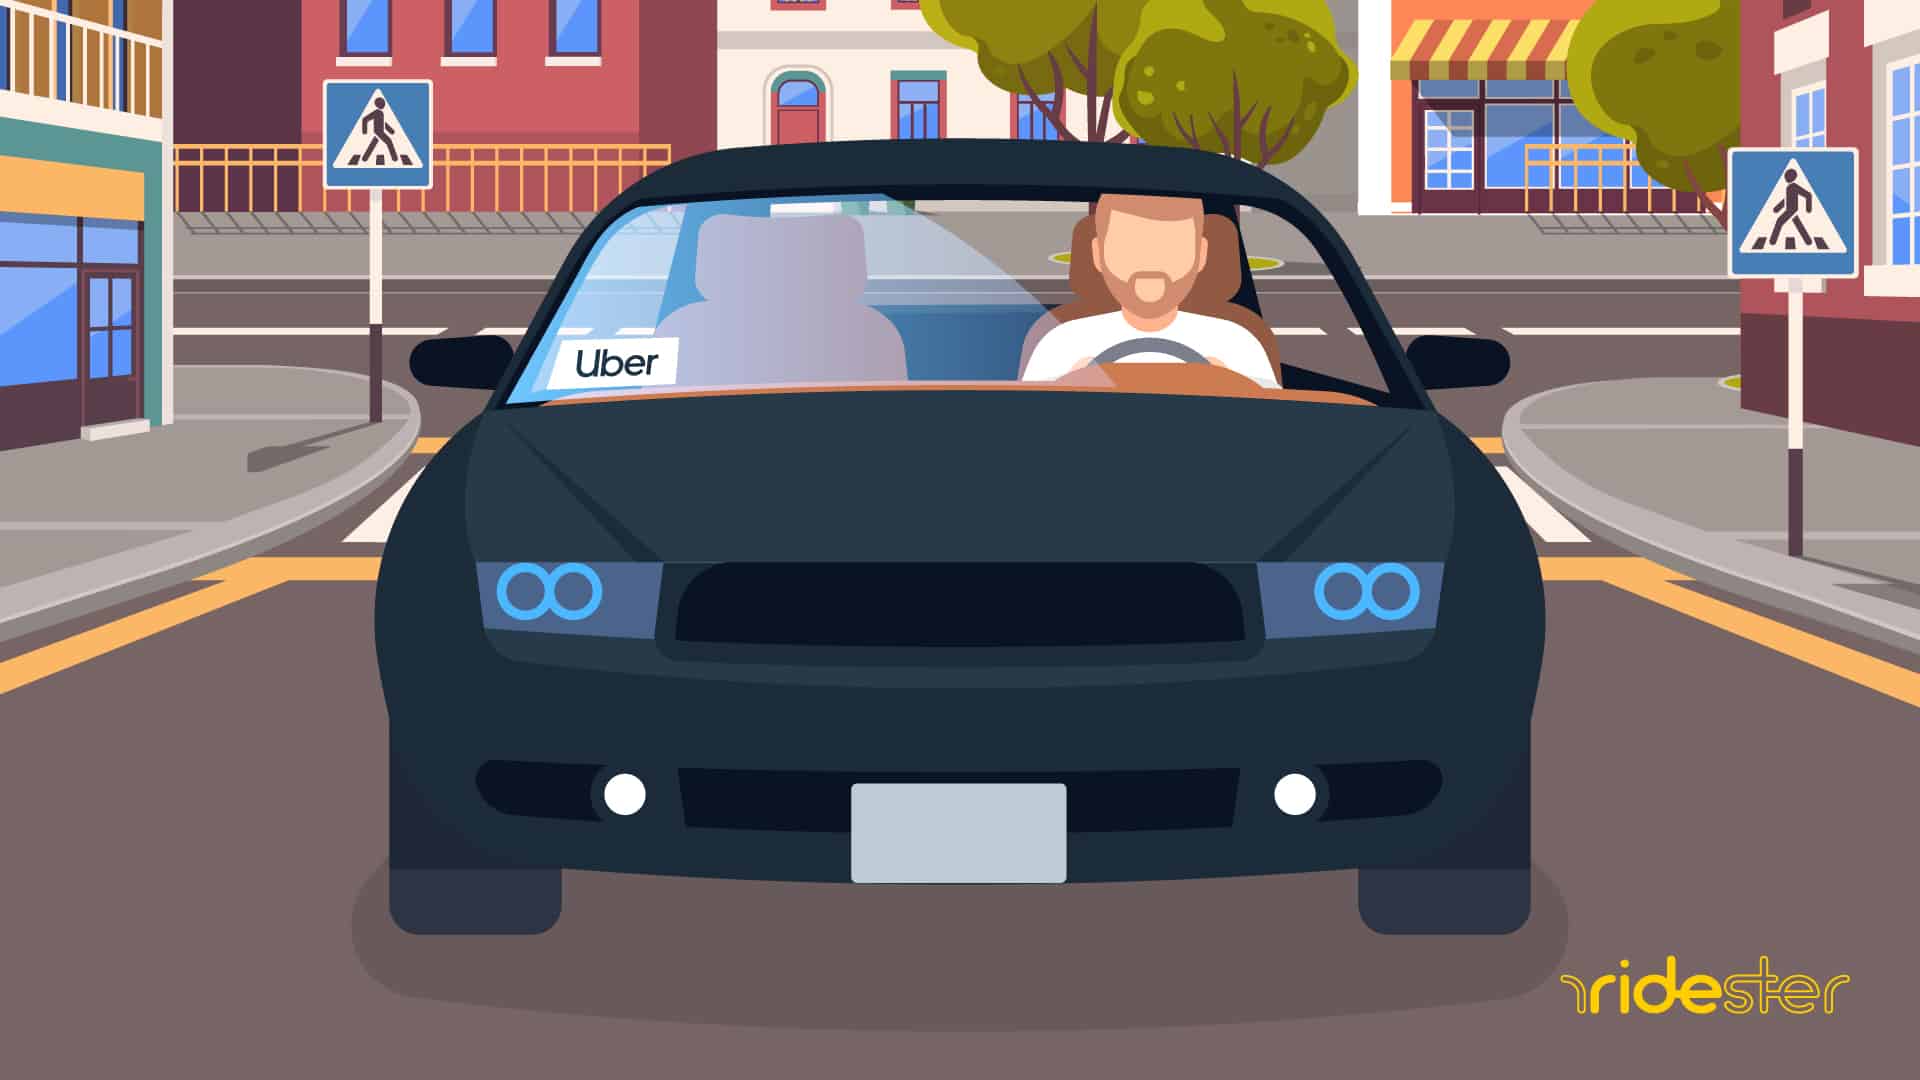 Uber Decal Requirements The Best Places To Purchase